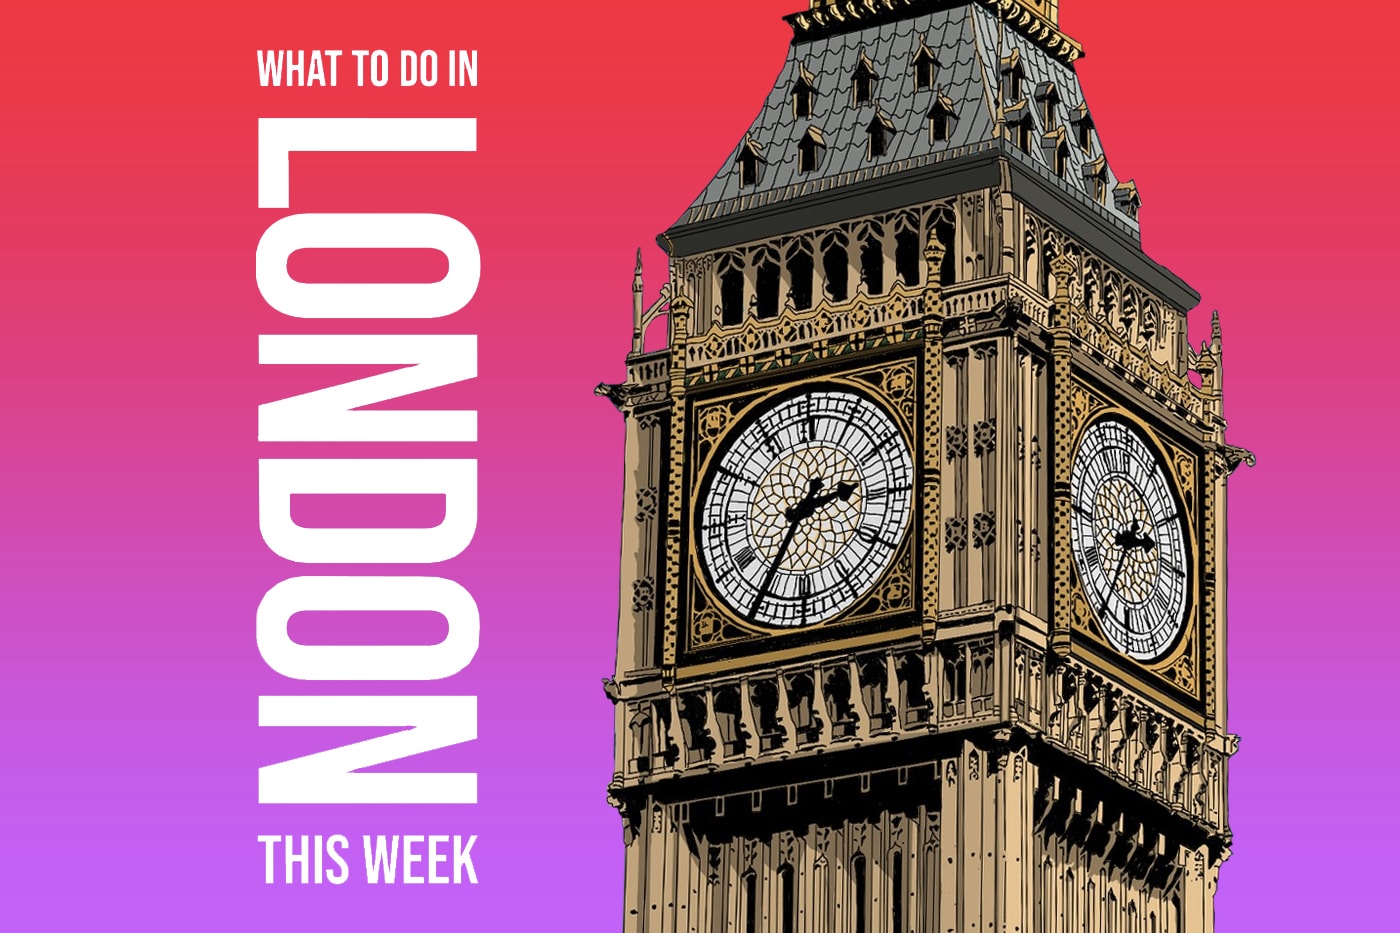 London UK things to do art food fashion shopping nightlife music museum Drake Dave Edvard Munch GZA IAMDDB Jacquees Kith Mahalia Maverick Sabre GZA British Museum Hito Steyerl Selfridges Serpentine Sackler Gallery Queer Spaces: London, 1980s – Today Endo at Rotunda